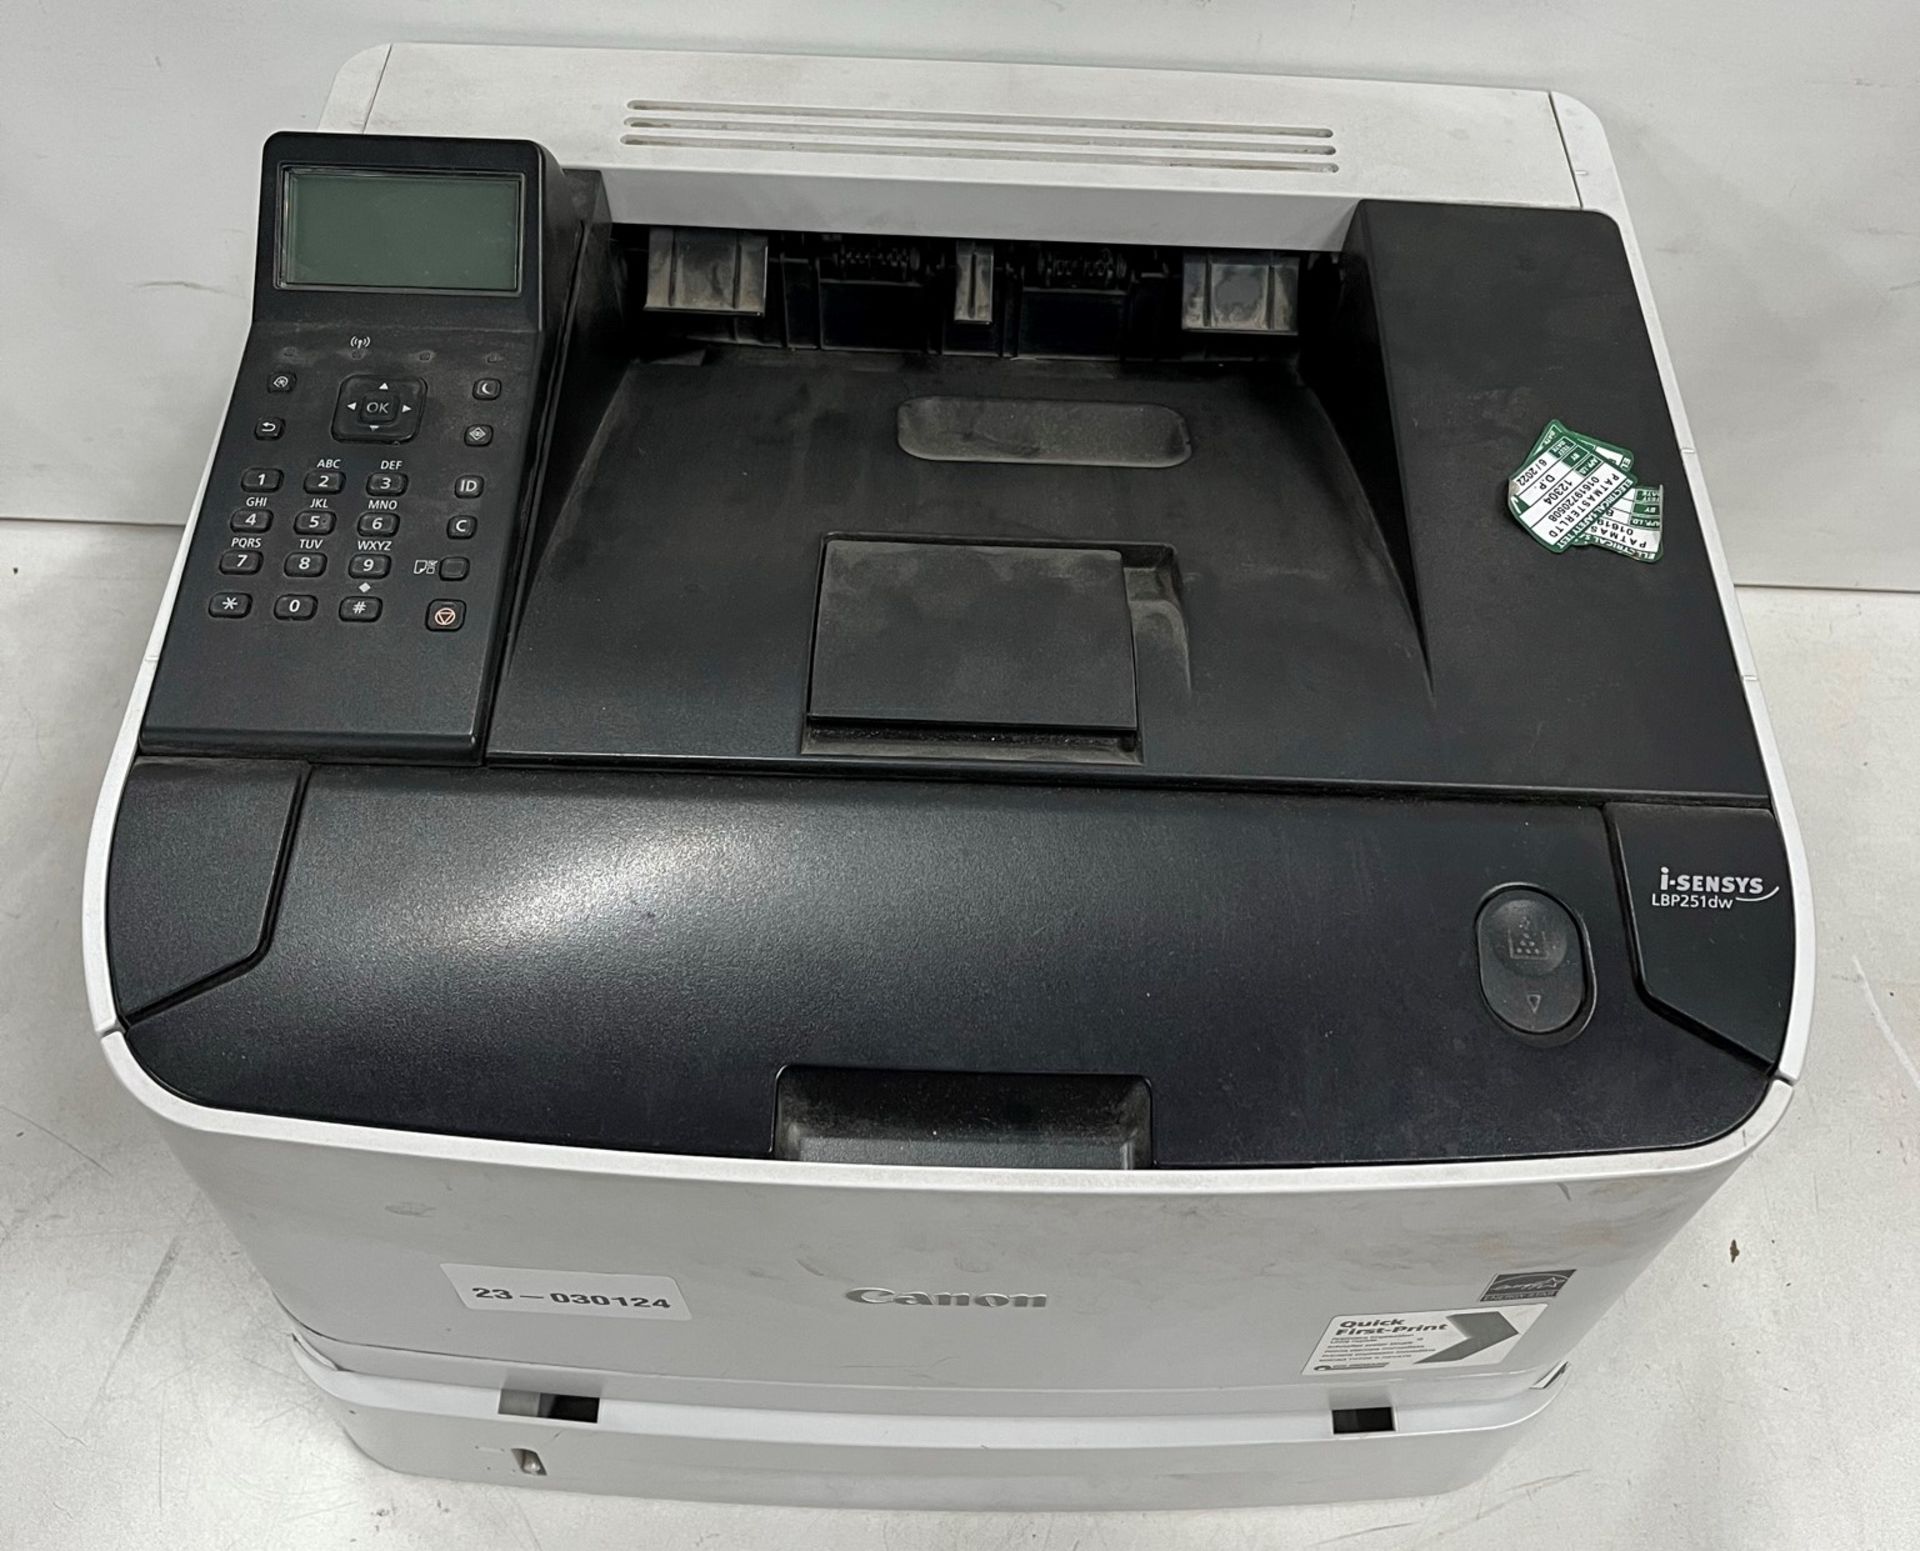 Cannon F161900 Multifunction Printer - Image 4 of 14